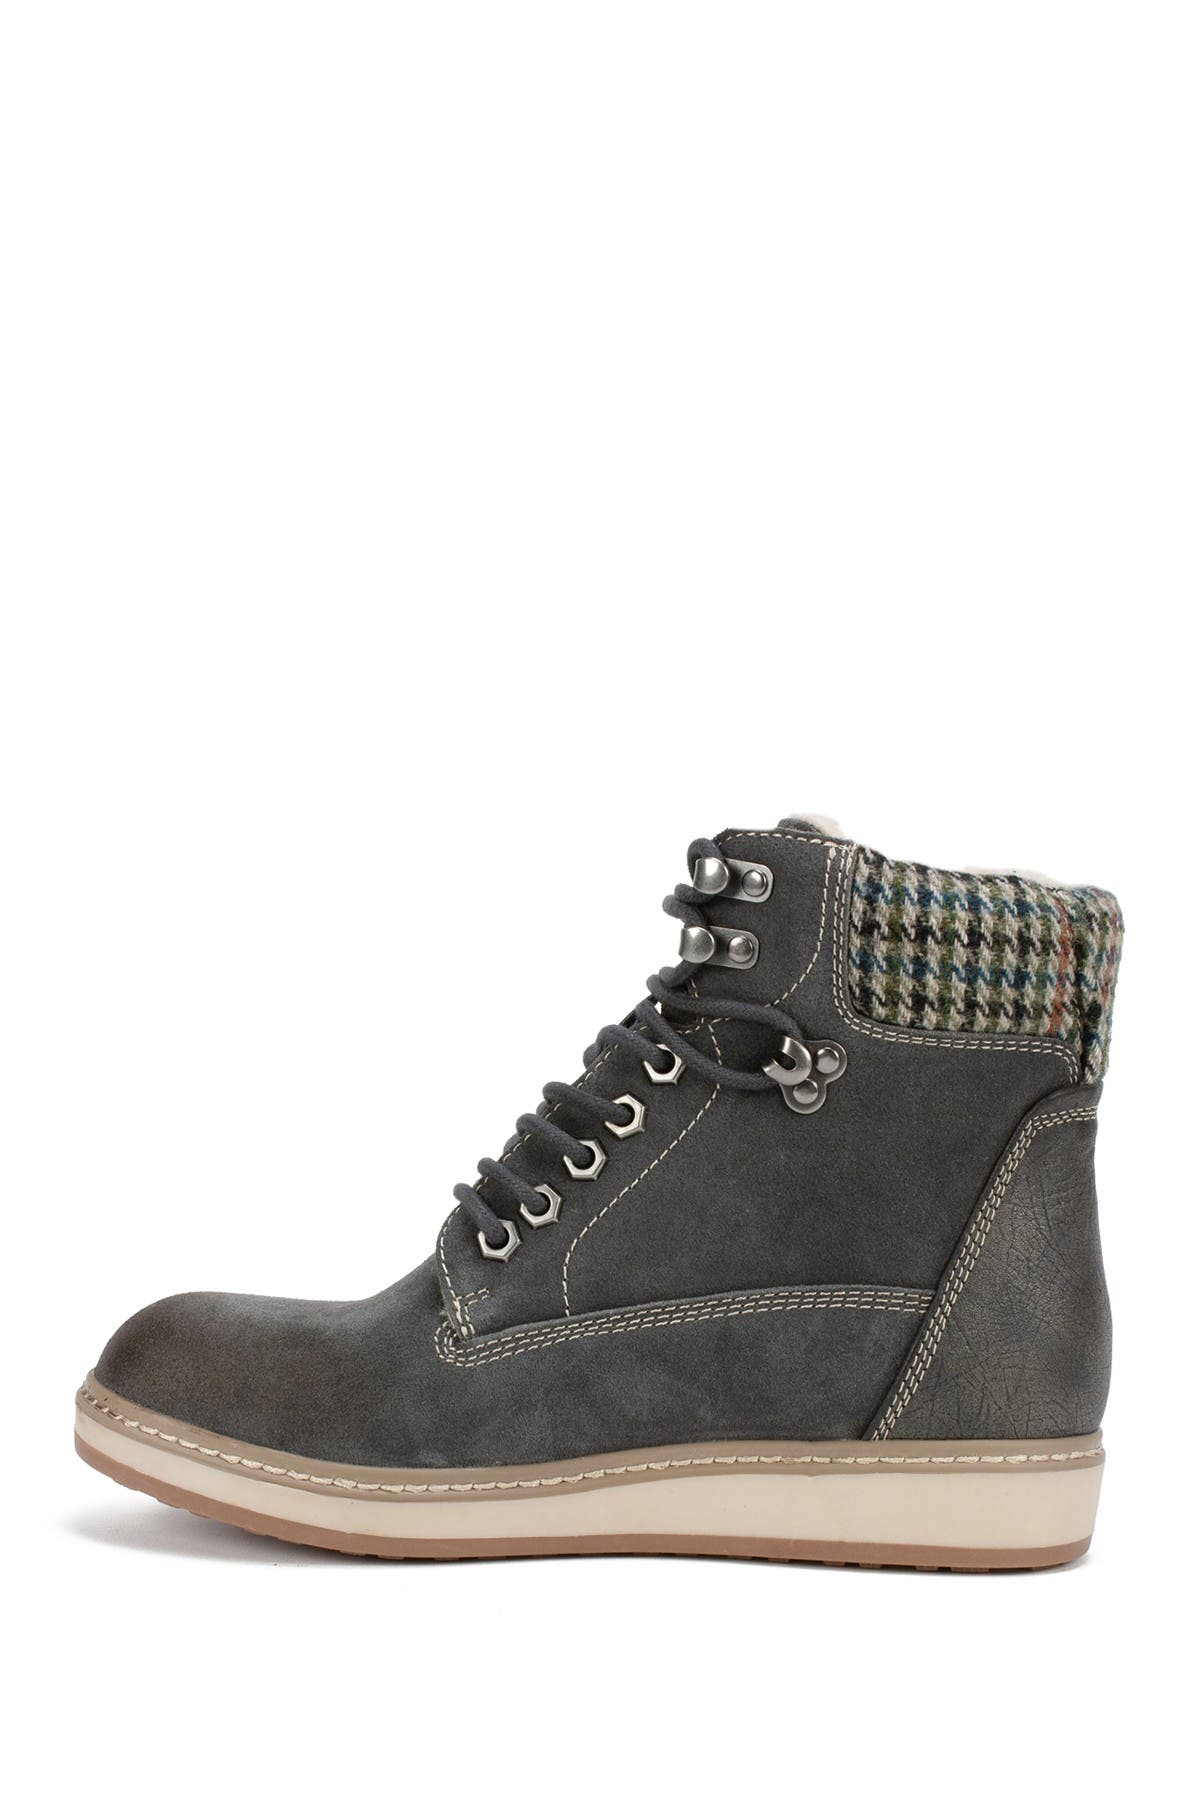 White Mountain Footwear Theo Suede Lace-up Faux Shearling Lined Boot In Open Grey